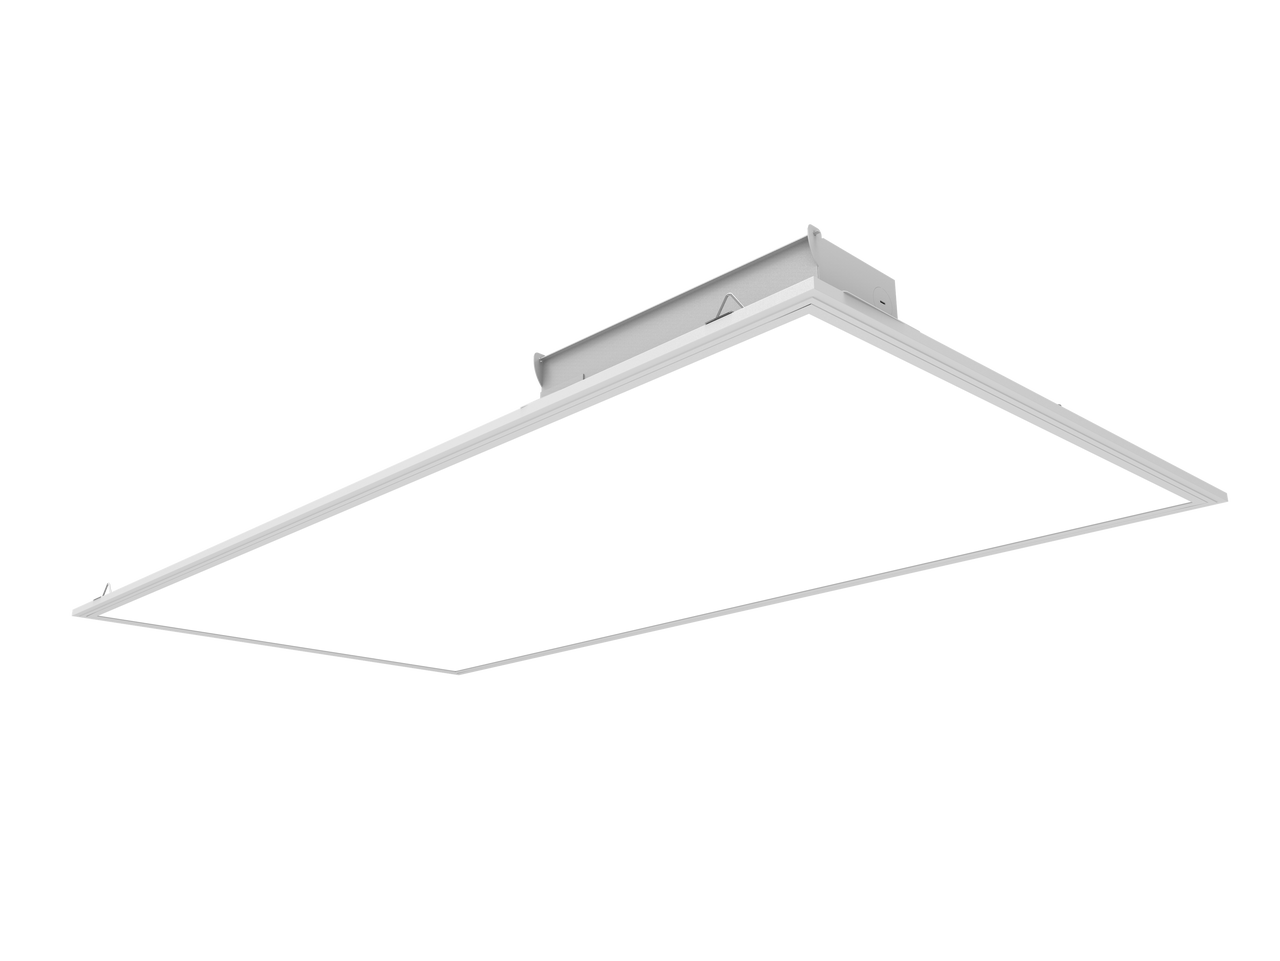 LED Flat Panel 2X4  - 3500K -  Drop Ceiling Light - Neutral White - Dimmable